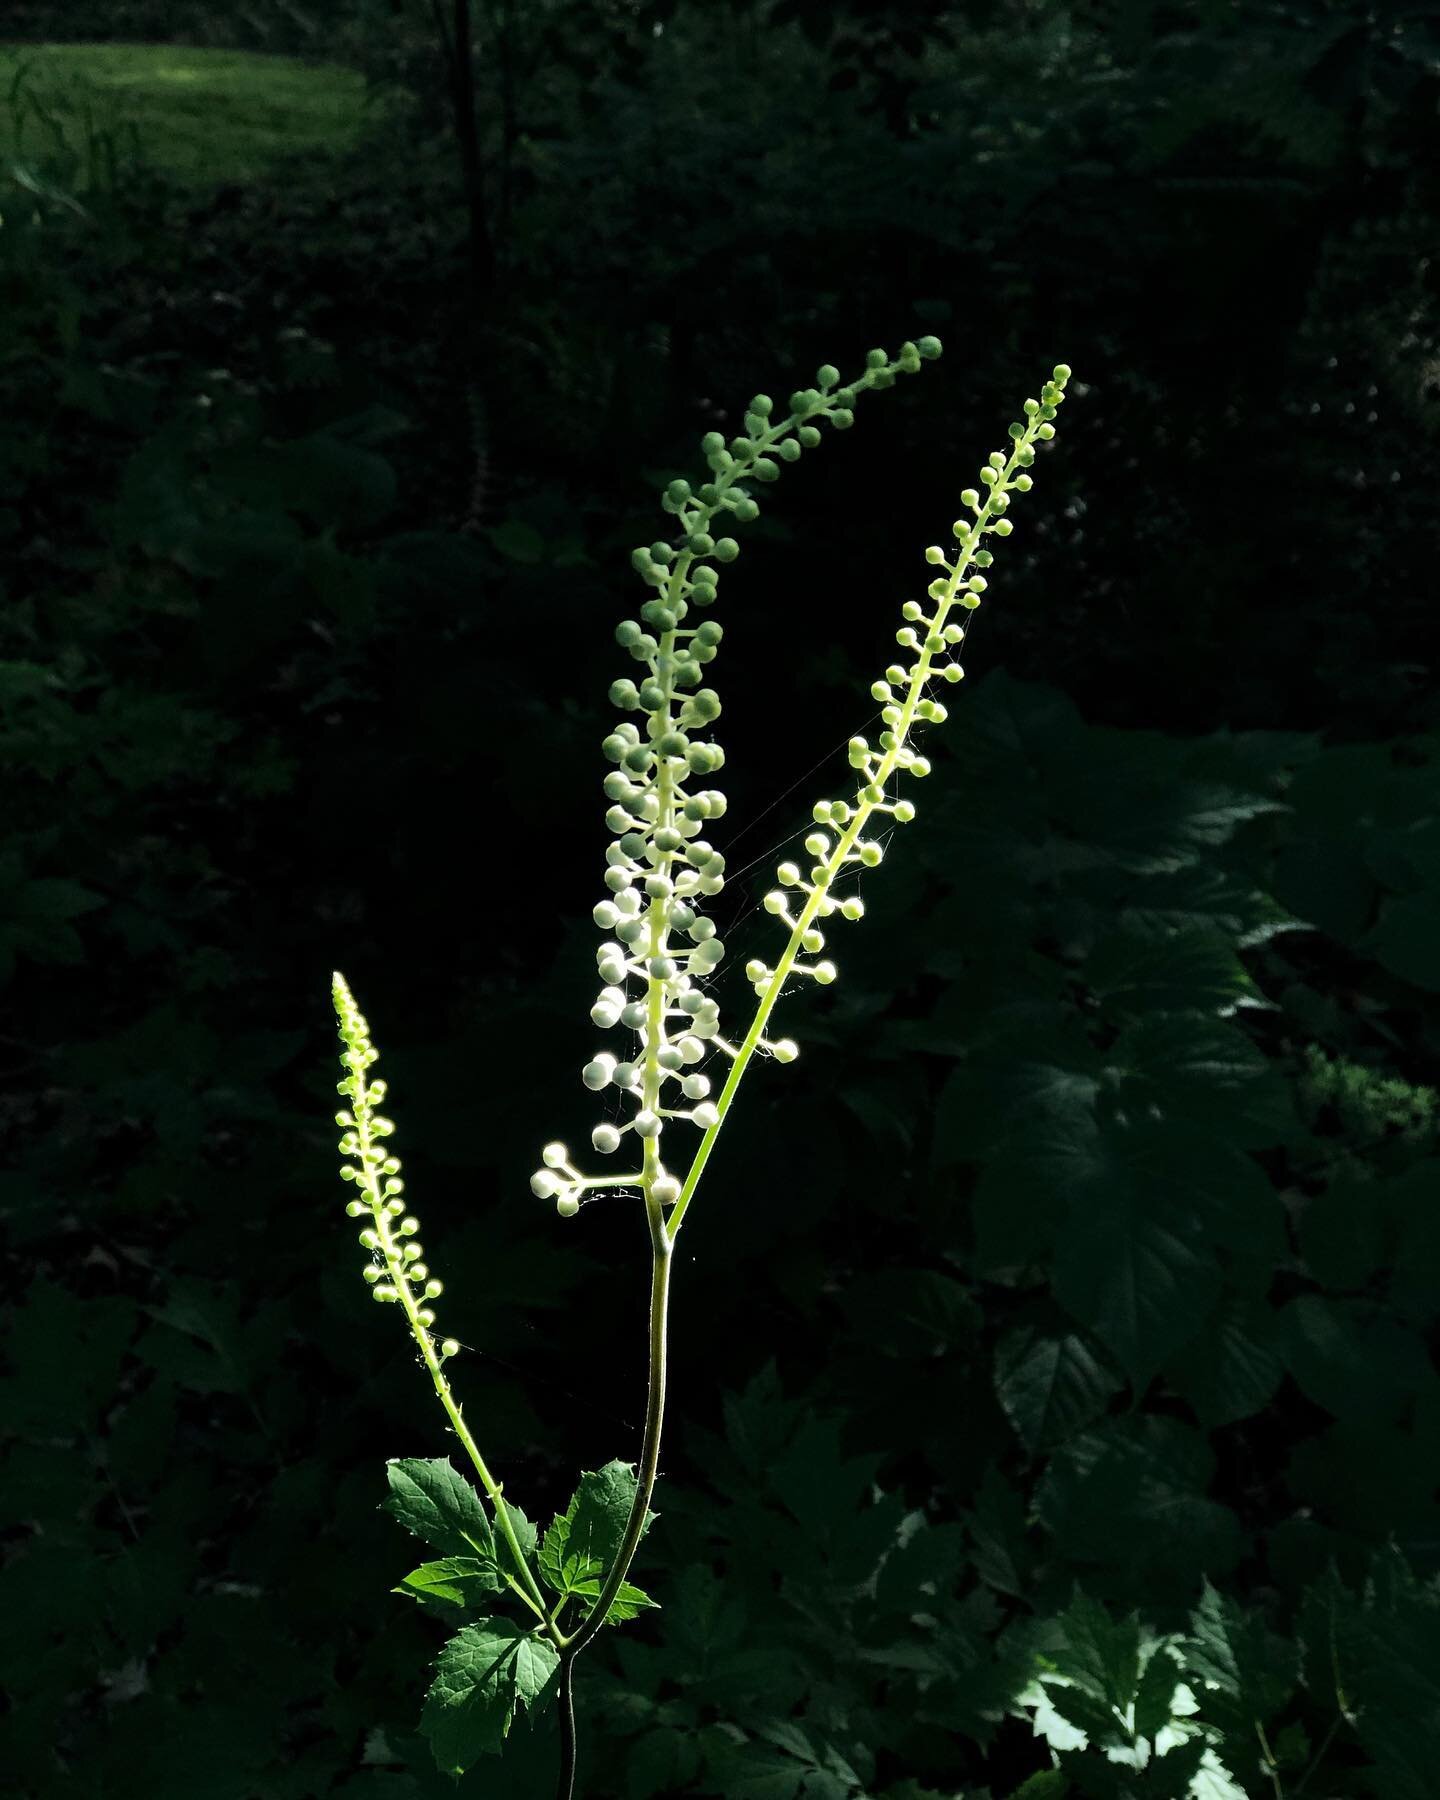 I love to walk the garden in early morning to see how the light interacts with my plants. Here, this stem of Actaea racemosa (bugbane or fairy candle) buds are spot lighted for just a few fleeting moments. #bugbane #fairycandle #actaearacemosa #black